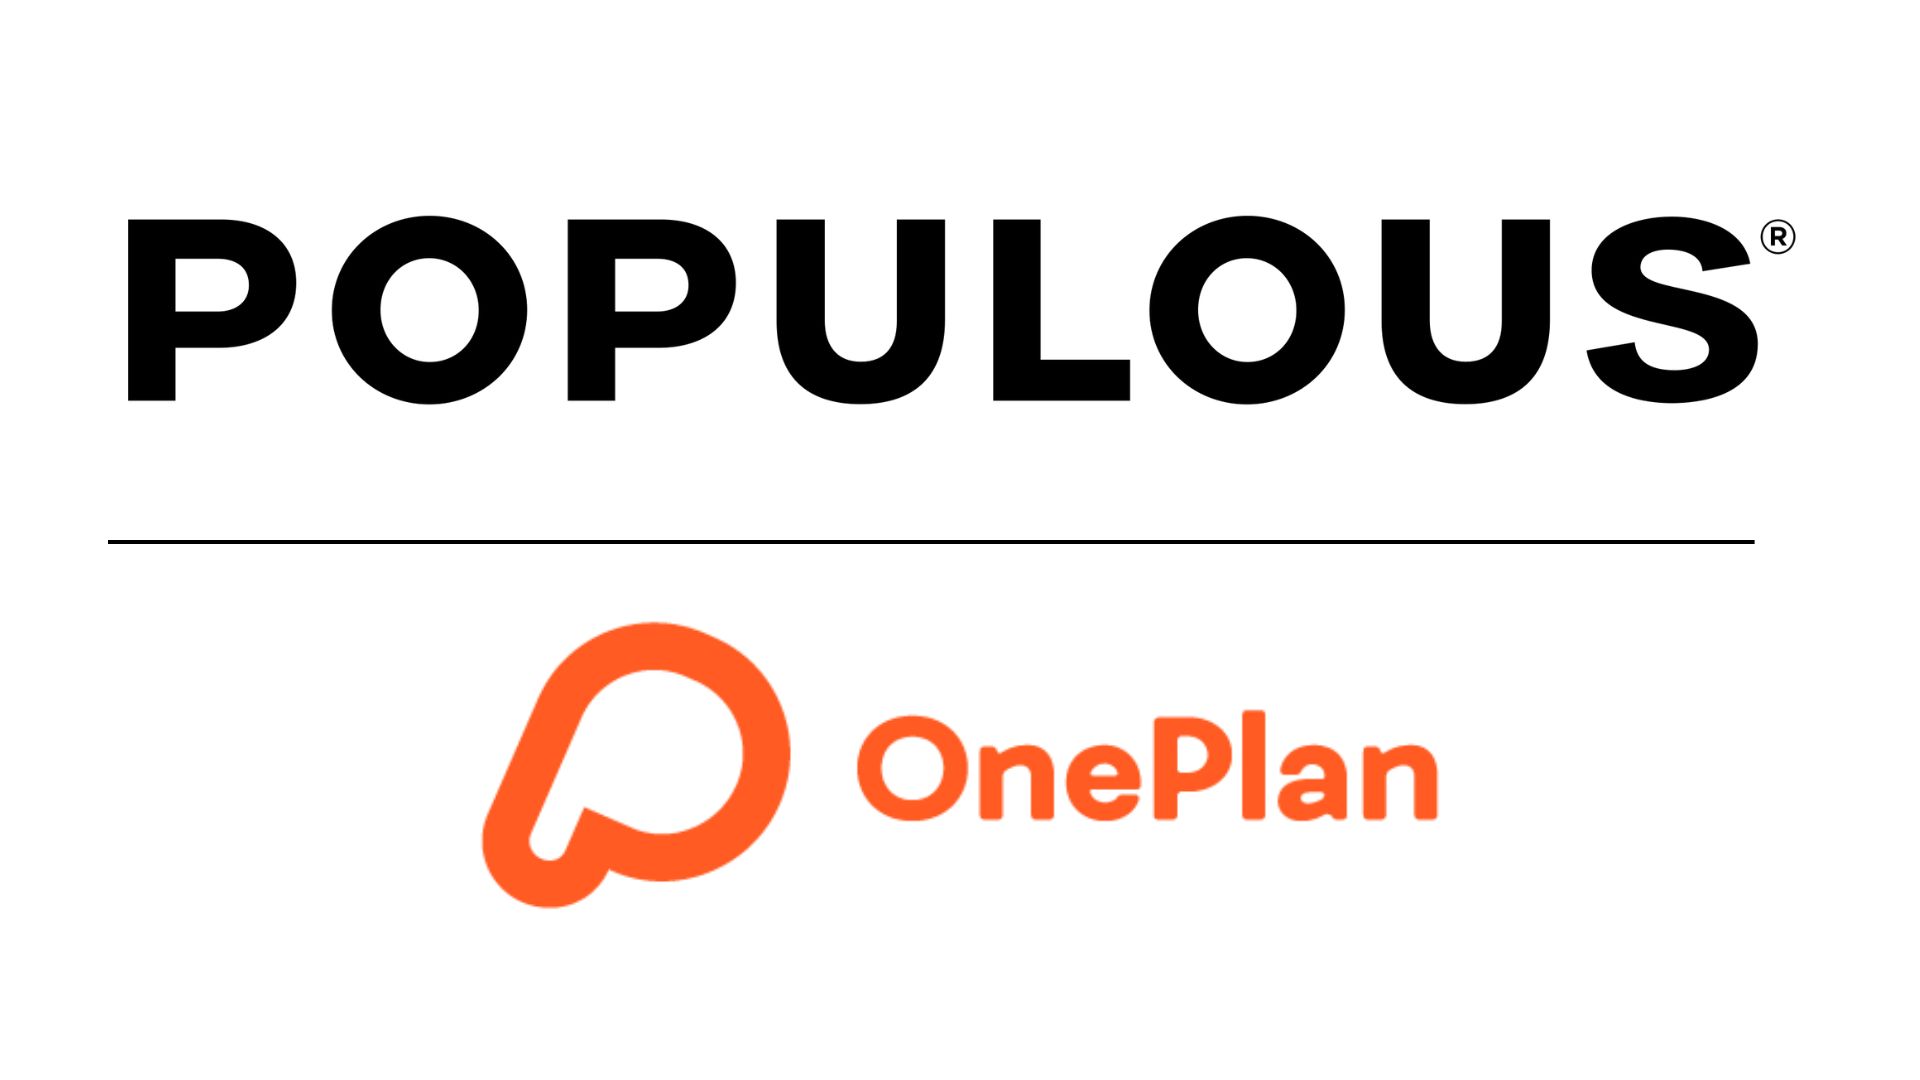 Populous Invests in Leading Event Planning Technology Company, OnePlan